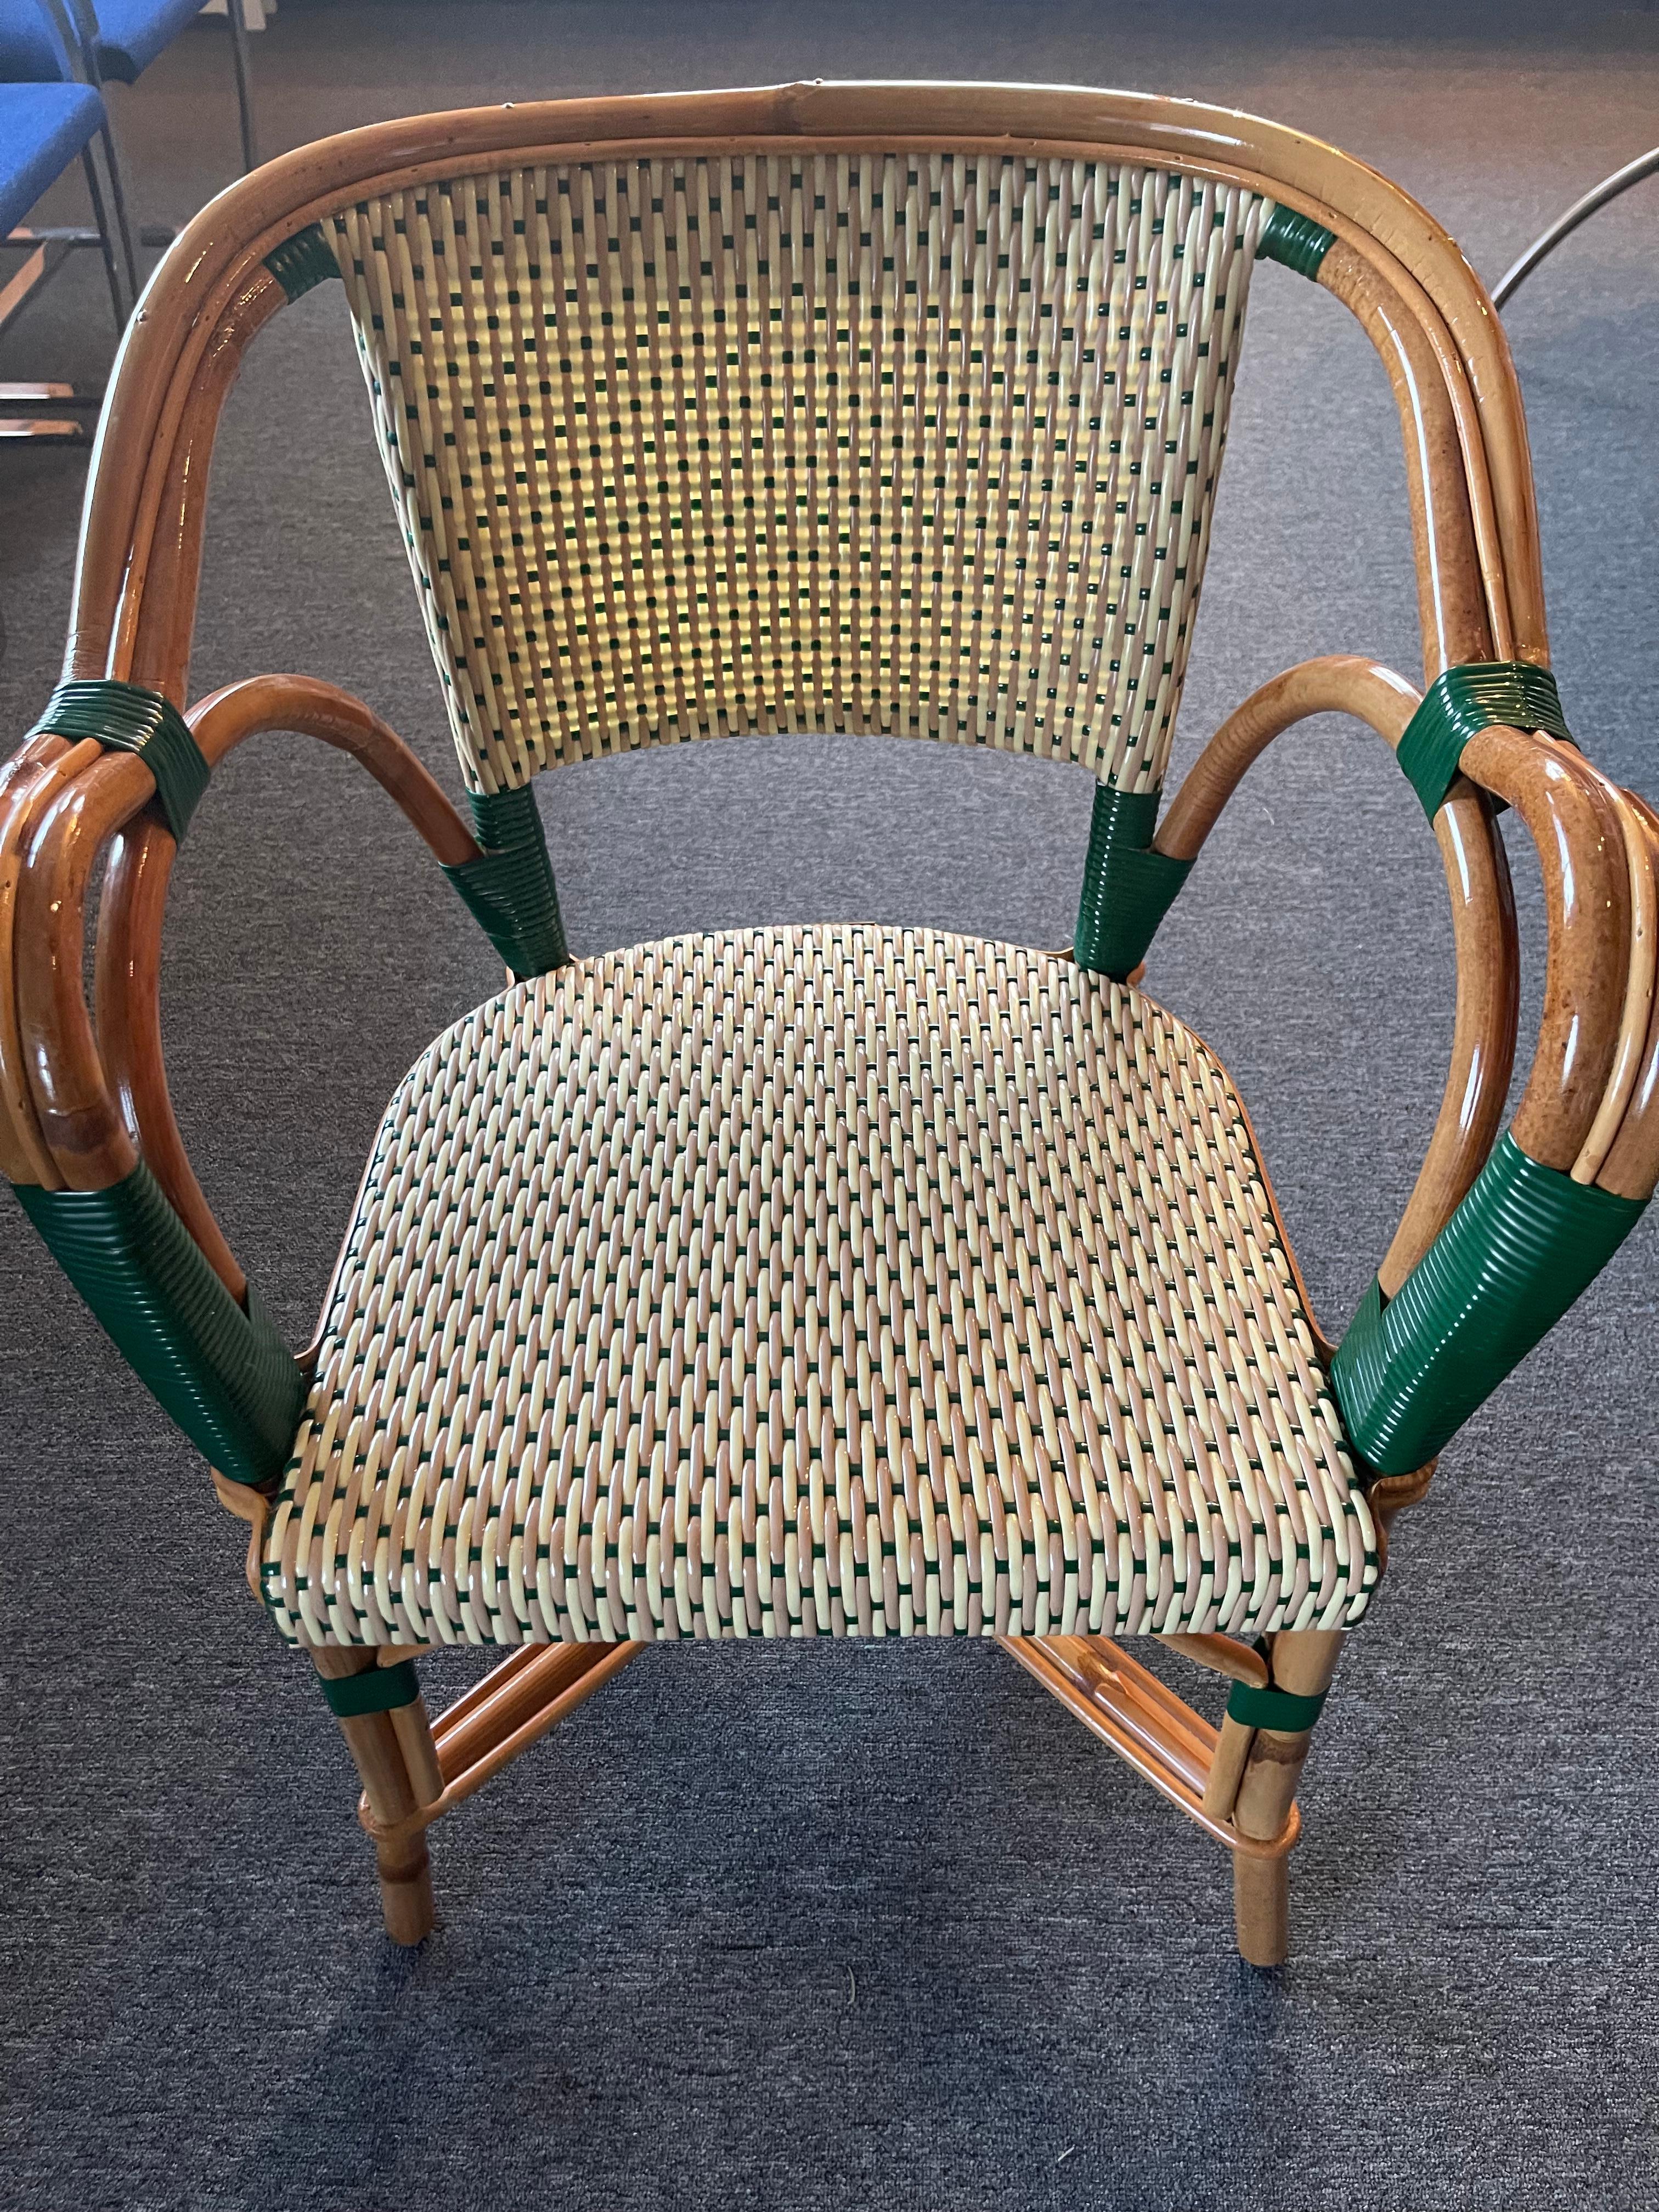 These are the classic Maison Louis Drucker Trianon and Fouquet Parisian bistro chairs. Their rattan frames are crafted in a time-honored technique perfected by the French, bent and shaped by hand until the iconic shape is achieved and the rattan’s